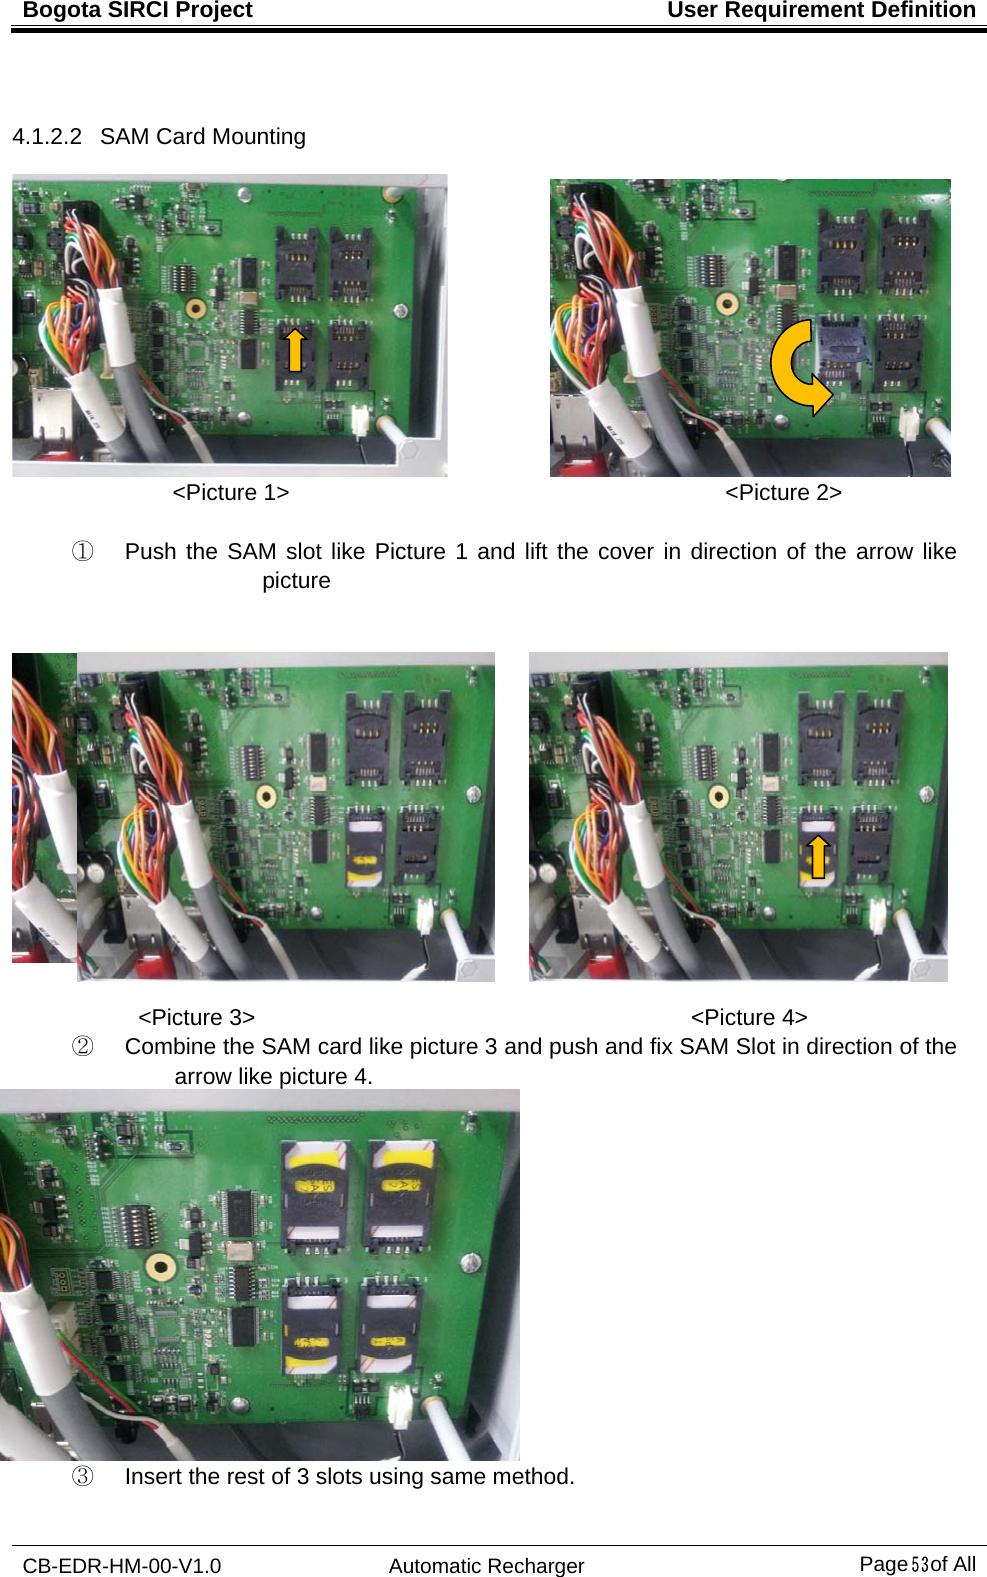 Bogota SIRCI Project  User Requirement Definition CB-EDR-HM-00-V1.0 Automatic Recharger Page５３ of All  4.1.2.2   SAM Card Mounting            &lt;Picture 1&gt;                                      &lt;Picture 2&gt;  ①  Push the SAM slot like Picture 1 and lift the cover in direction of the arrow like picture      &lt;Picture 3&gt;                                      &lt;Picture 4&gt; ②  Combine the SAM card like picture 3 and push and fix SAM Slot in direction of the arrow like picture 4.    ③  Insert the rest of 3 slots using same method.